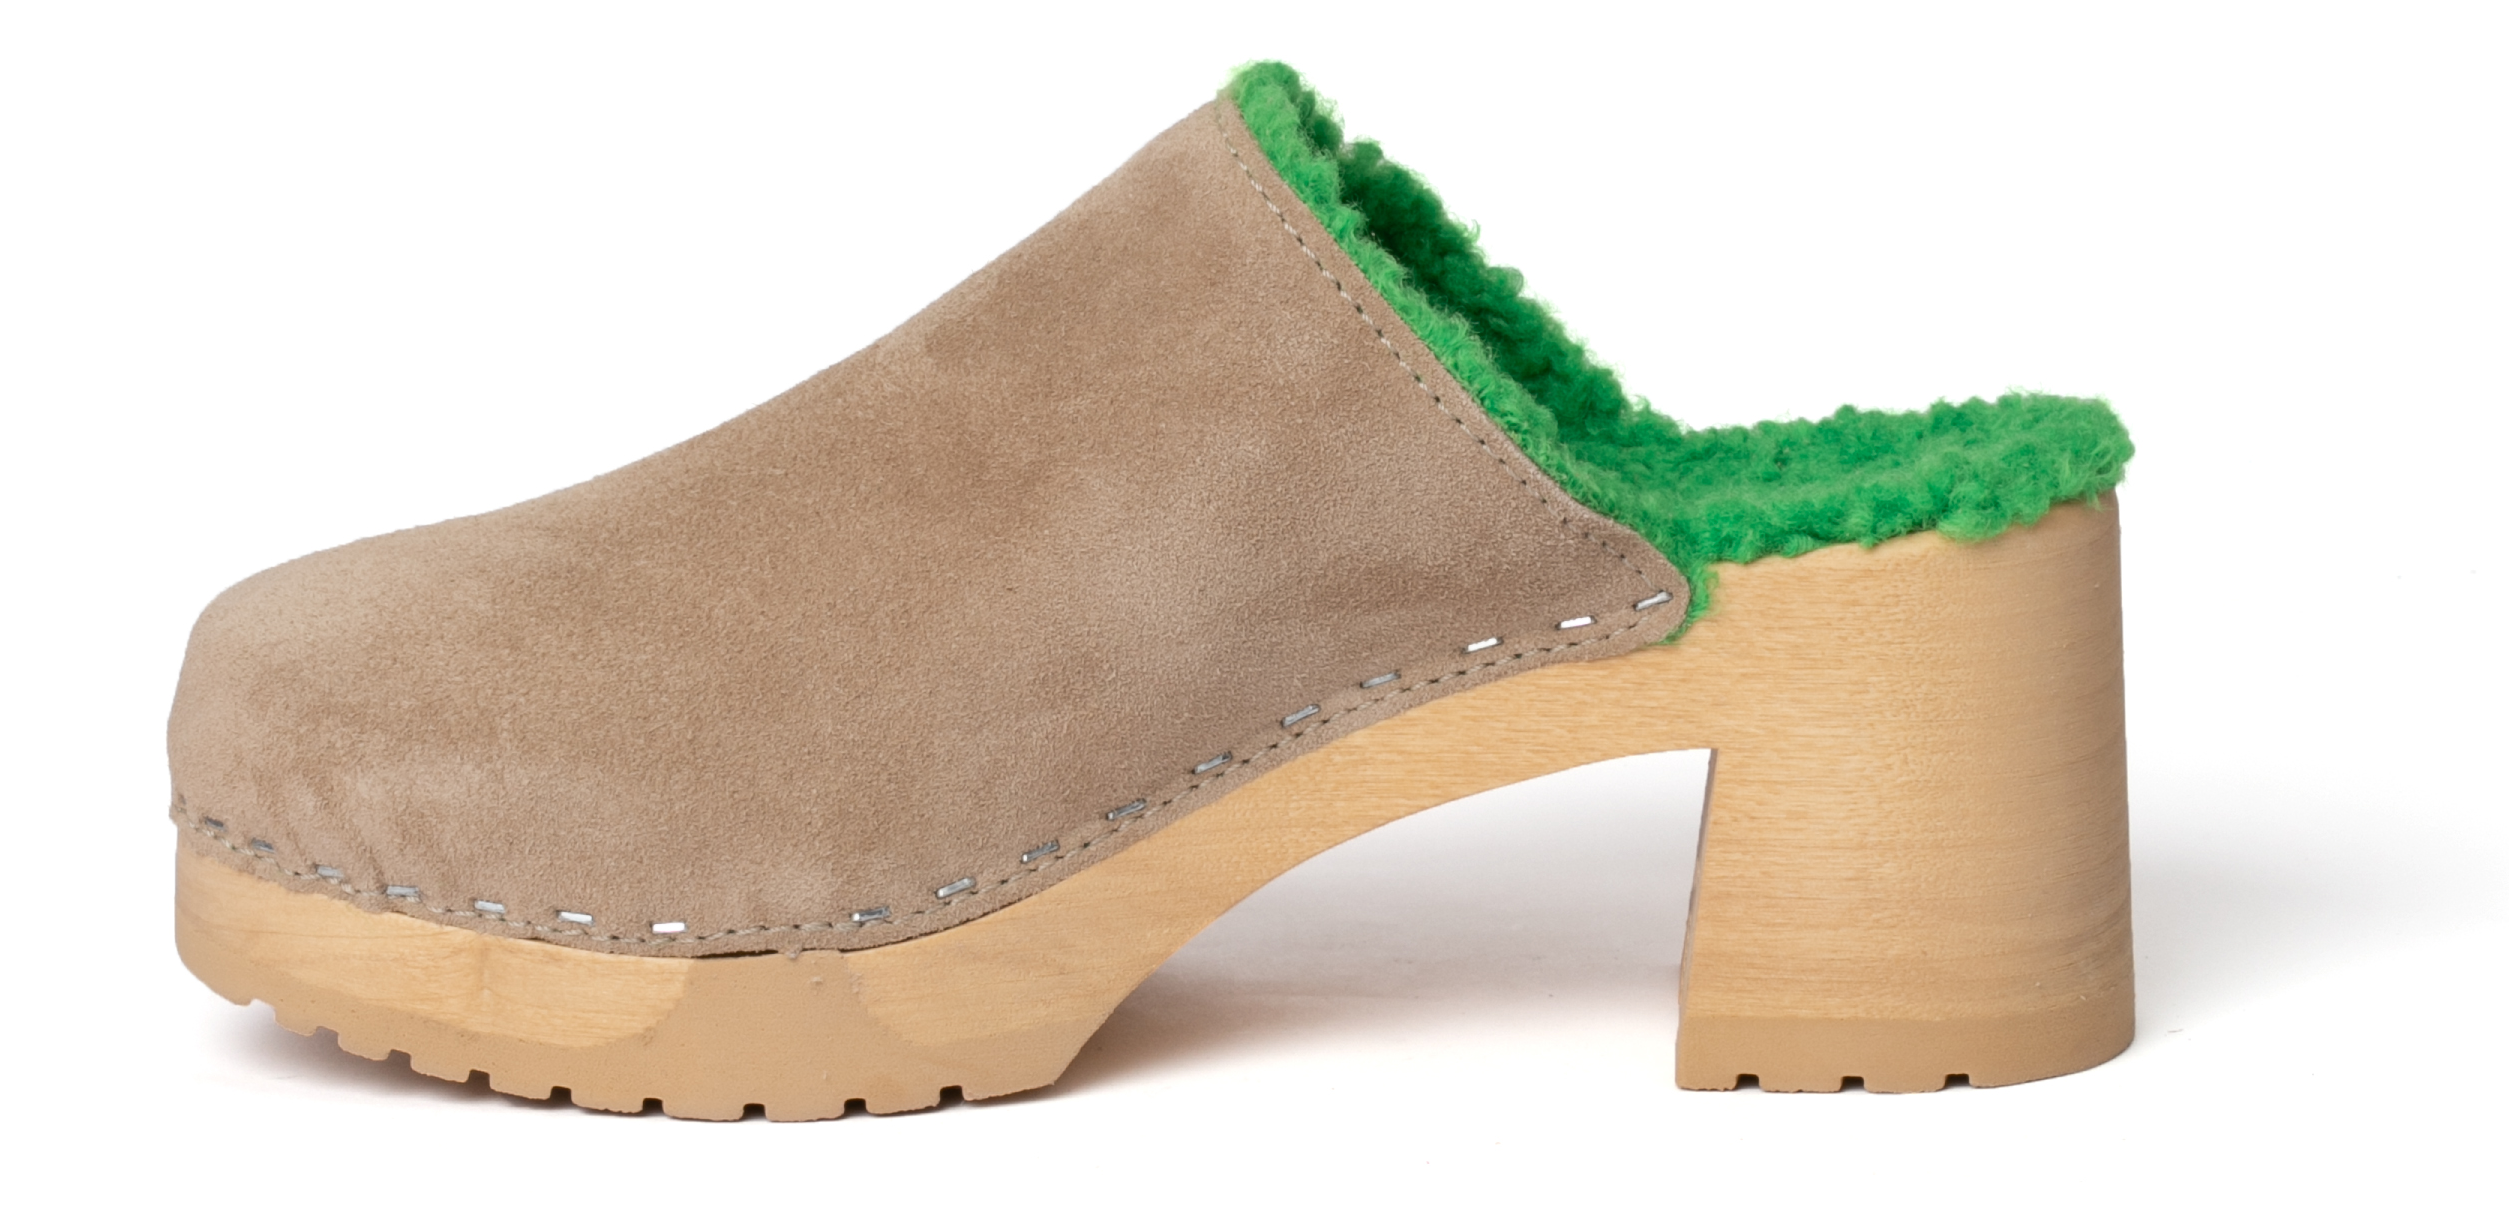 Clog made from poplar wood with smooth suede in color taupe, inner sole green plush by Softclox